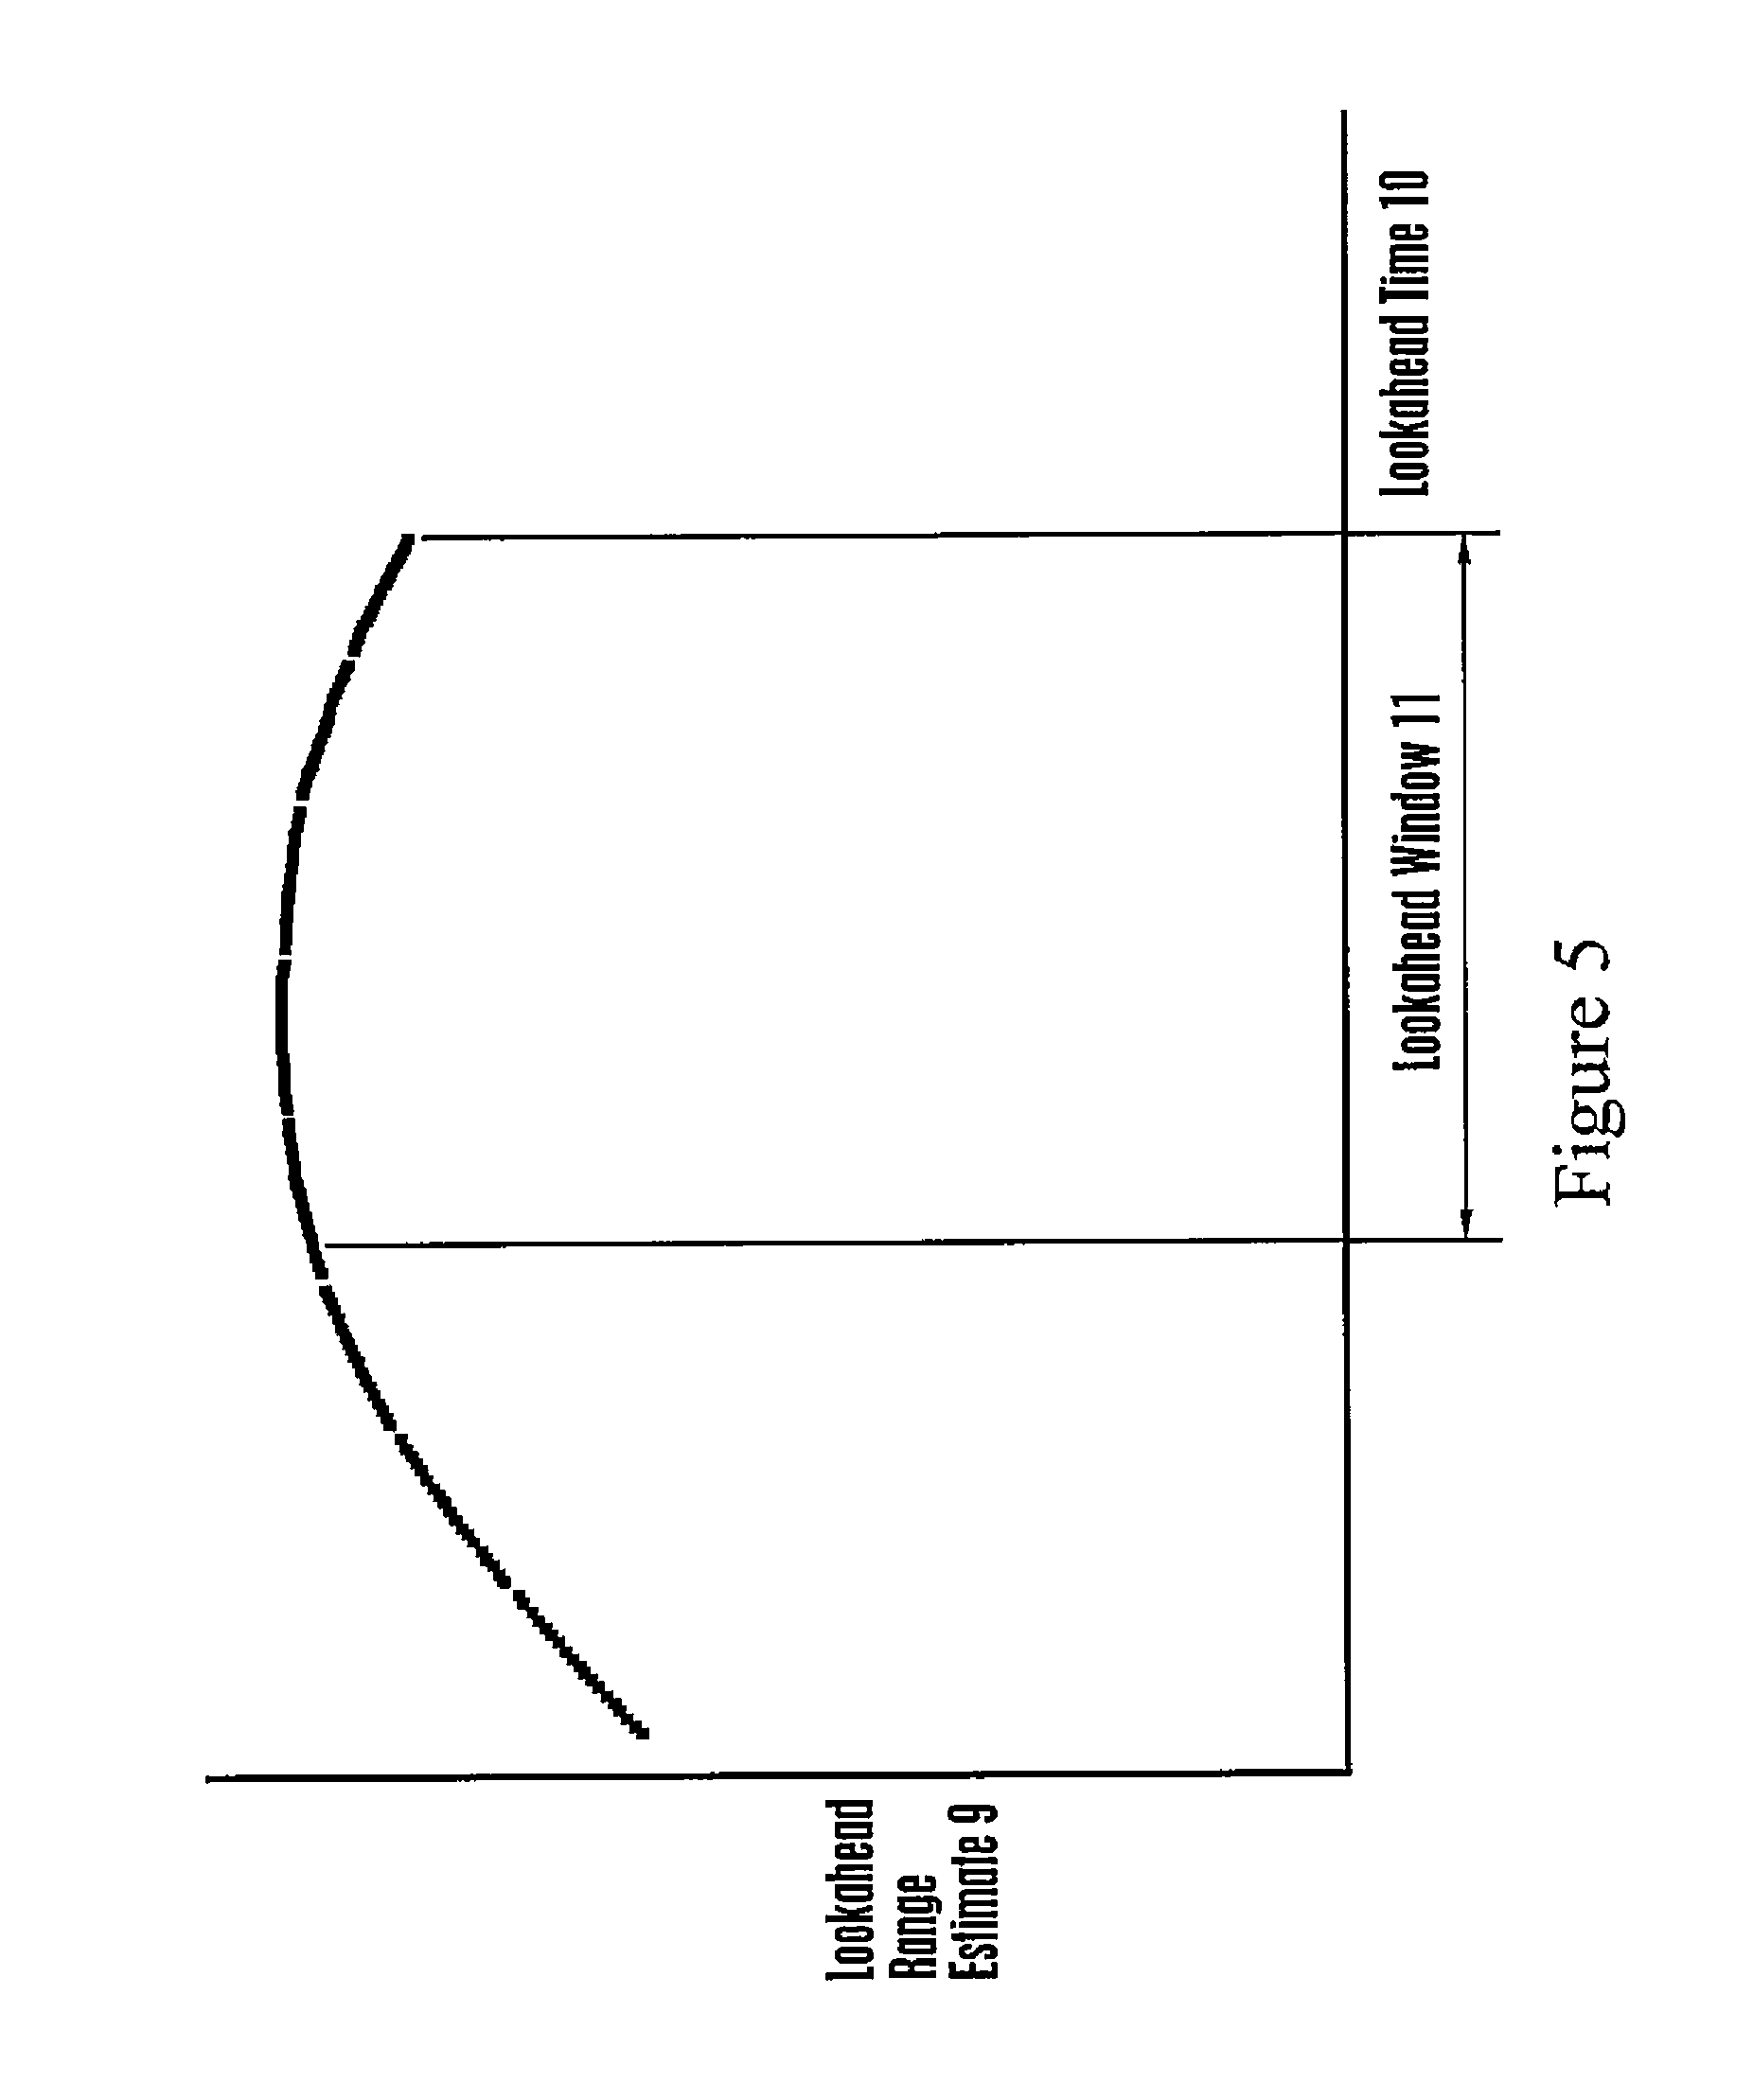 Method and apparatus for modeling of GNSS pseudorange measurements for interpolation, extrapolation, reduction of measurement errors, and data compression